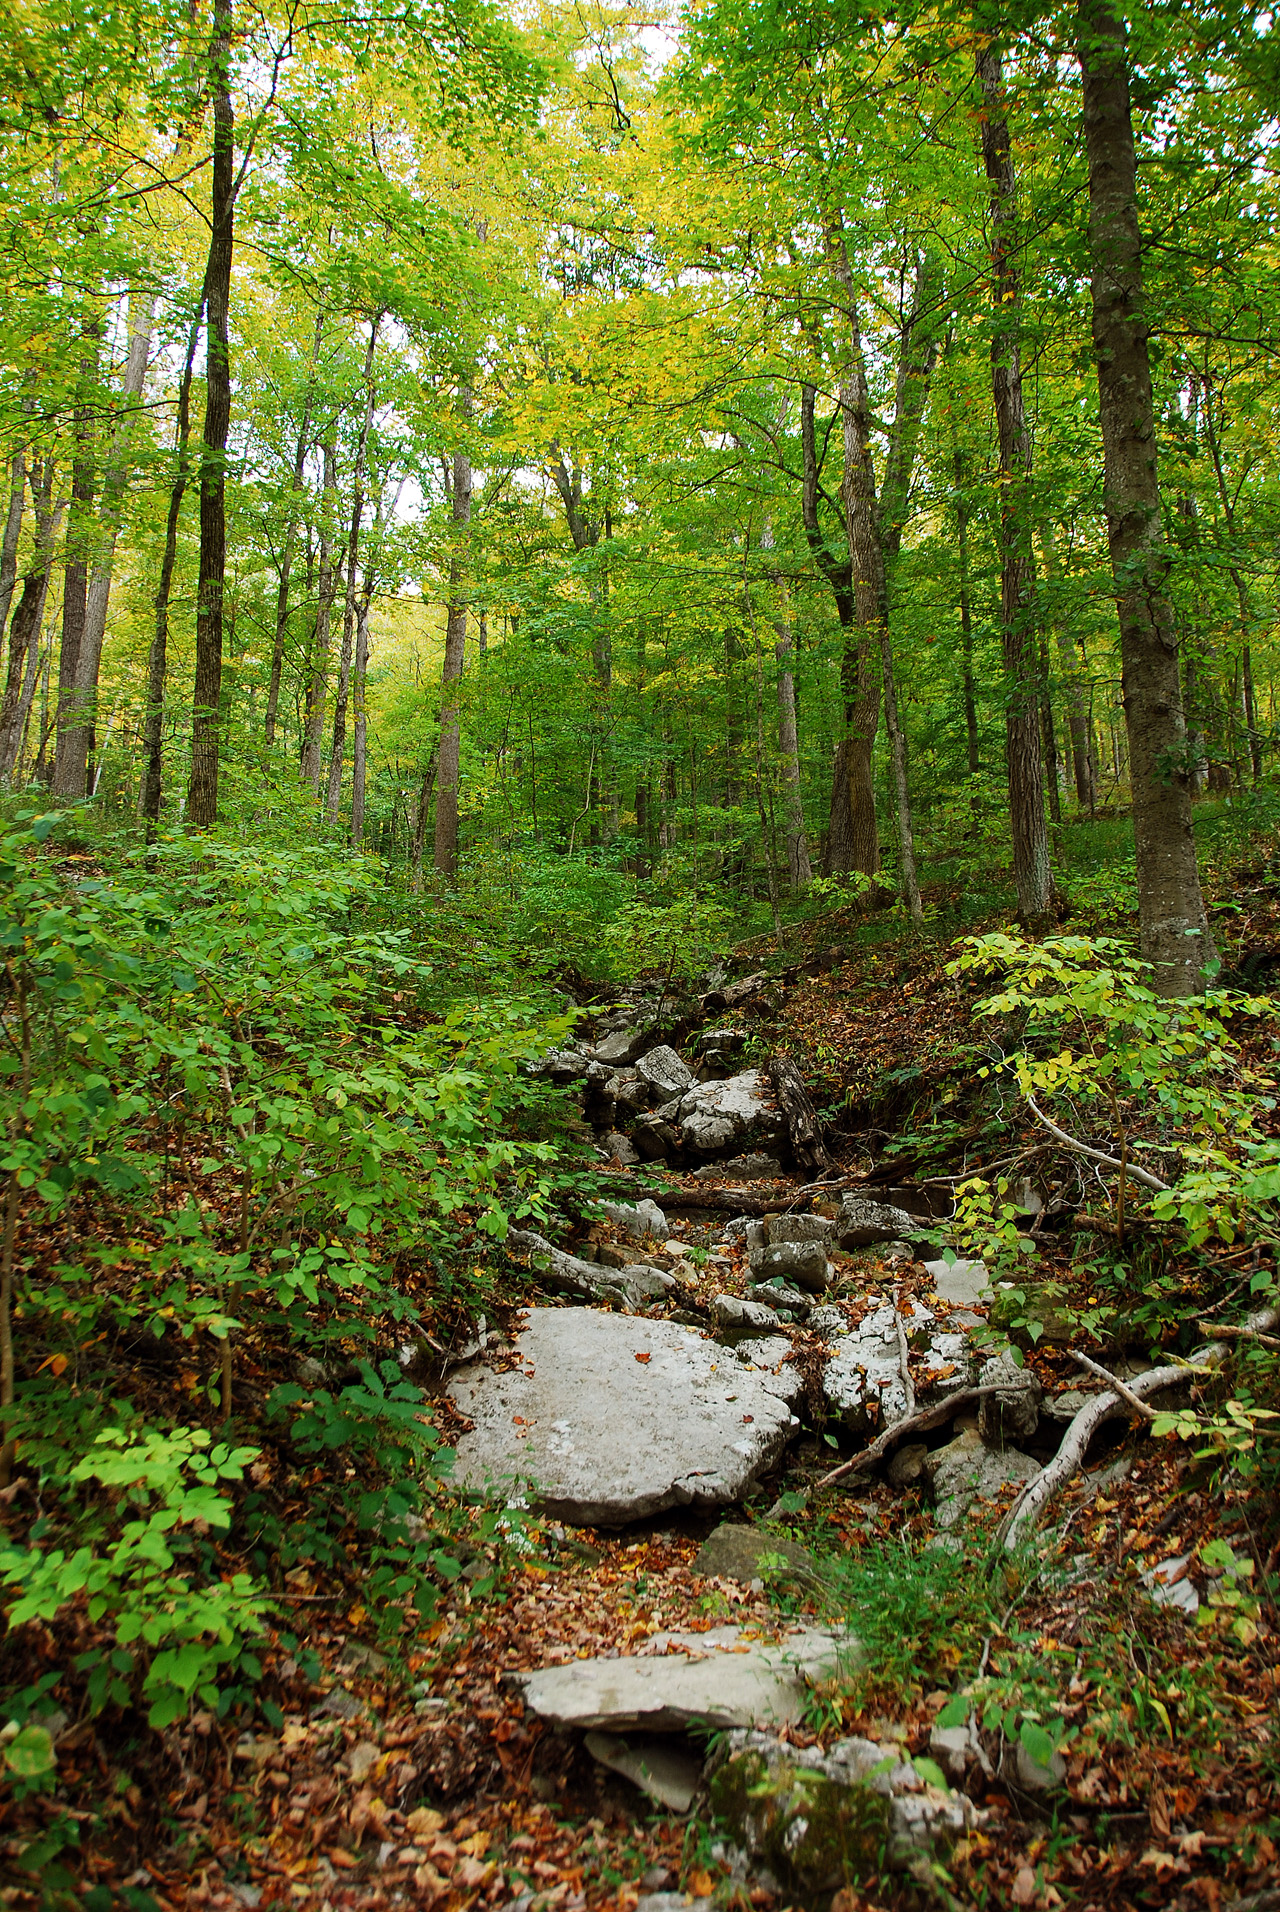 2012-10-12, 020, Mammoth Cave NP, KY